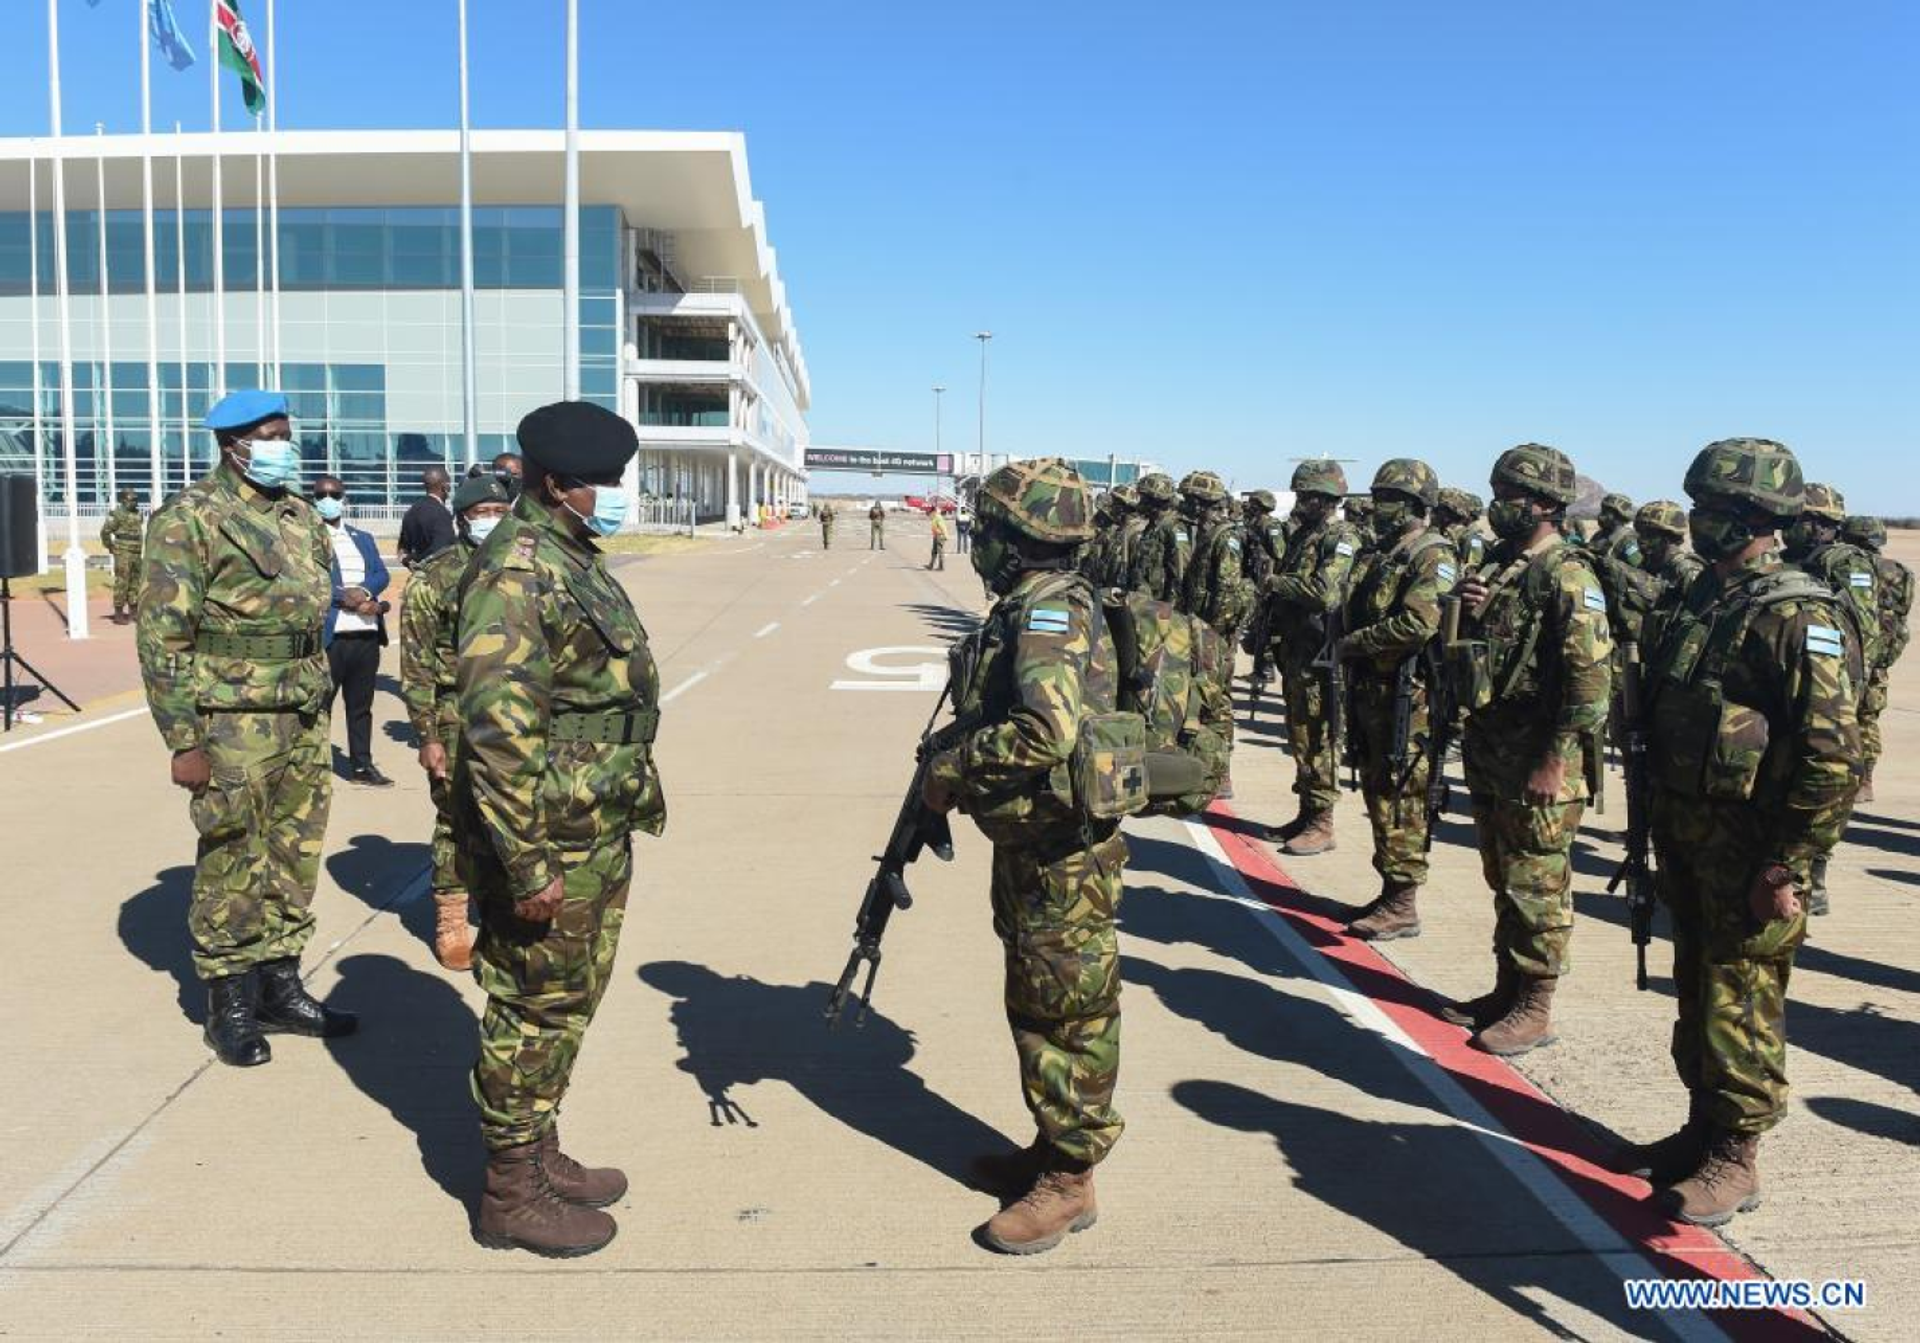 Botswana's President Mokgweetsi Masisi sends off troops to Mozambique as part of the Southern Africa Development Community (SADC) Standby Force at Sir Seretse Khama International Airport in Gaborone, Botswana, July 26, 2021. The Botswana Defence Force (BDF) will provide regional support to the Republic of Mozambique to combat the looming threat of terrorism and acts of violent extremism in the Cabo Delgado region, as an element of the SADC Mission in Mozambique. A total of 296 BDF soldiers will be deployed in Mozambique, and 70 of them departed on Monday. - Sputnik International, 1920, 01.02.2022